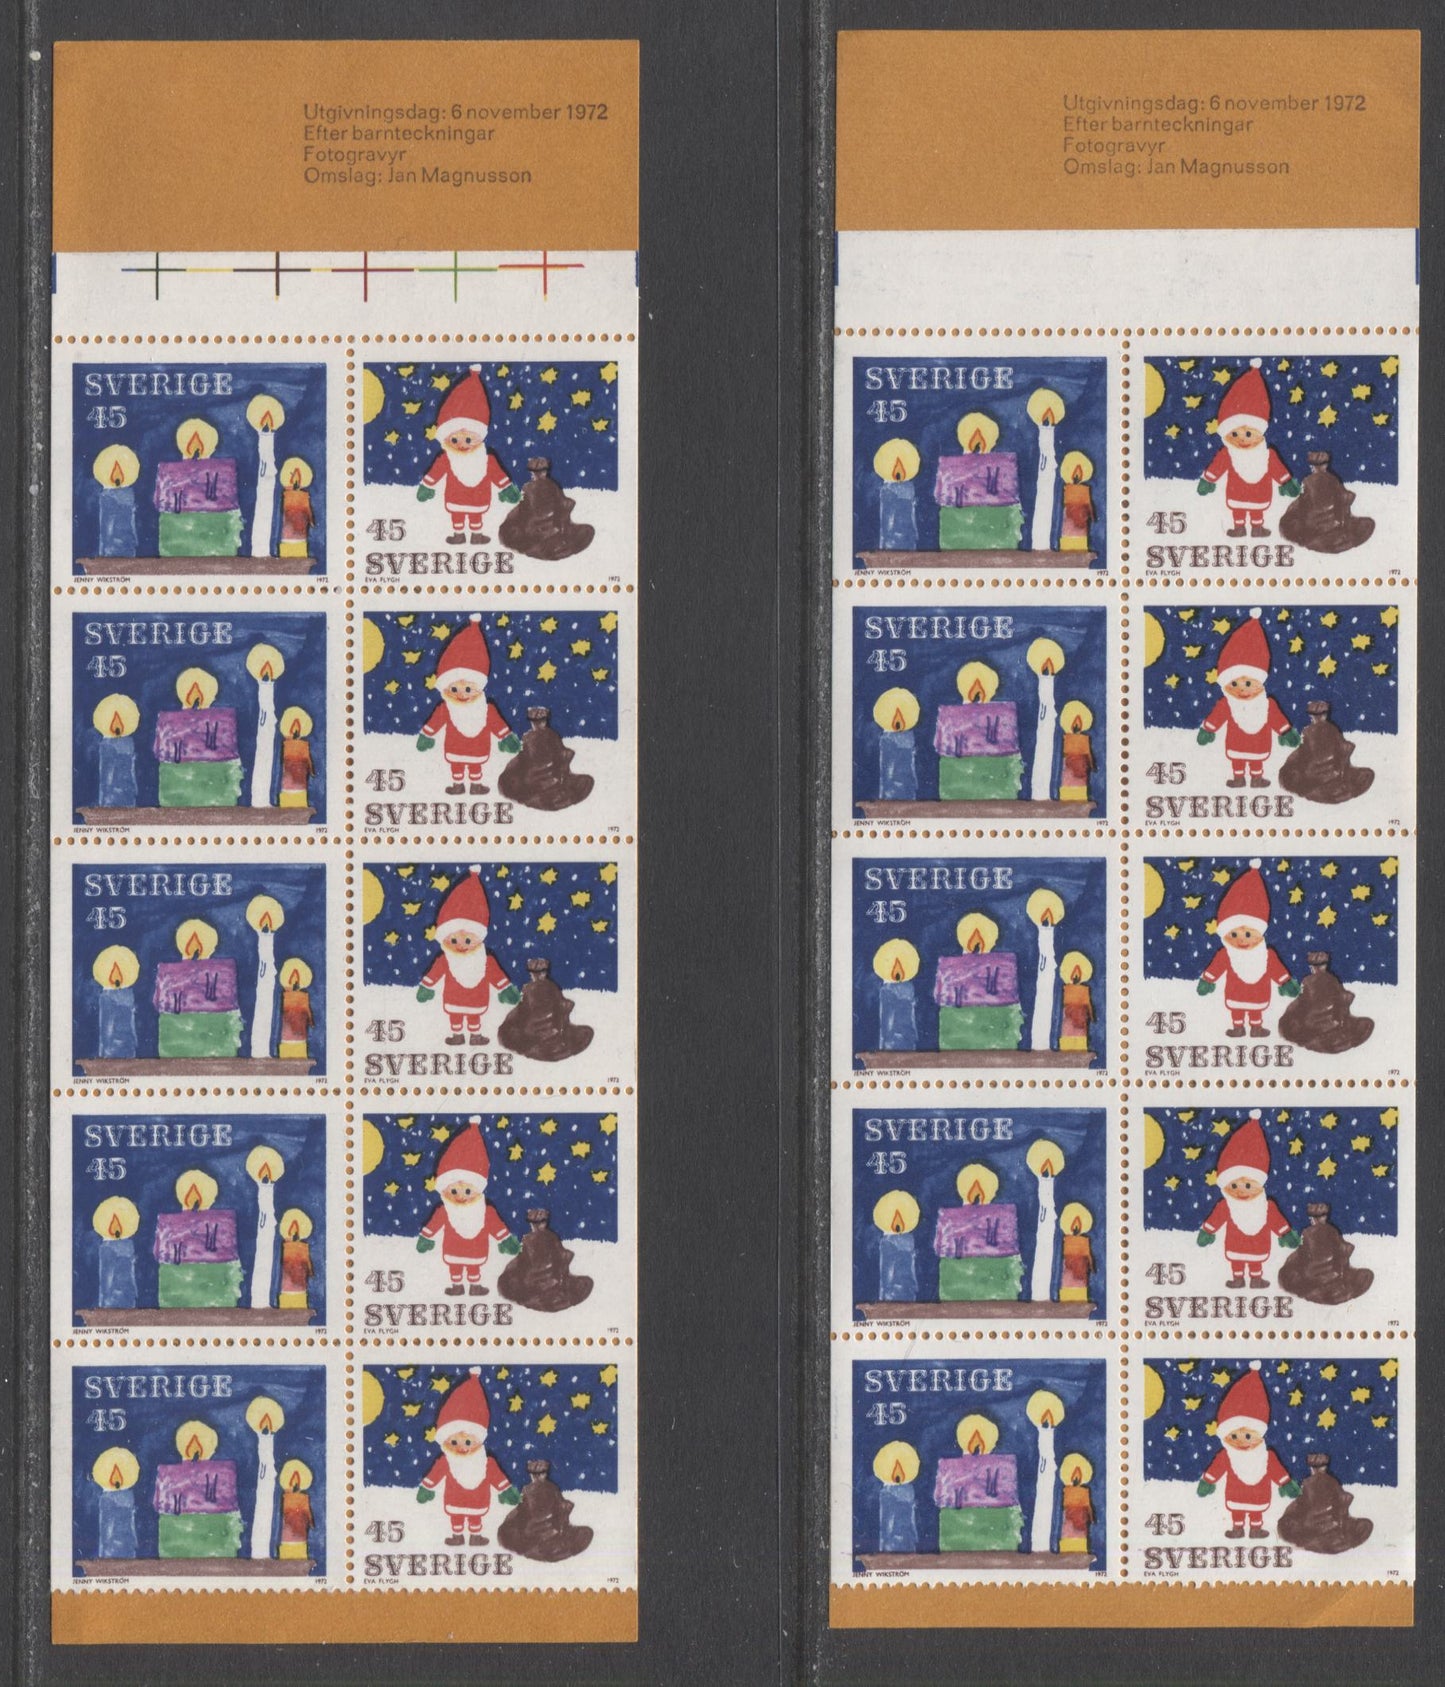 Lot 320 Sweden SC#952a (Facit #H261c)/952a (Facit #H261c) 1972 Christmas Issue, Yellow Orange Covers, Very Weak Tagging Or Untagged, Bisected Registration Marking, Full Crosses In Tab Of One Booklet, 2 VFNH Booklet of 10 (5x2), Estimated Value $20